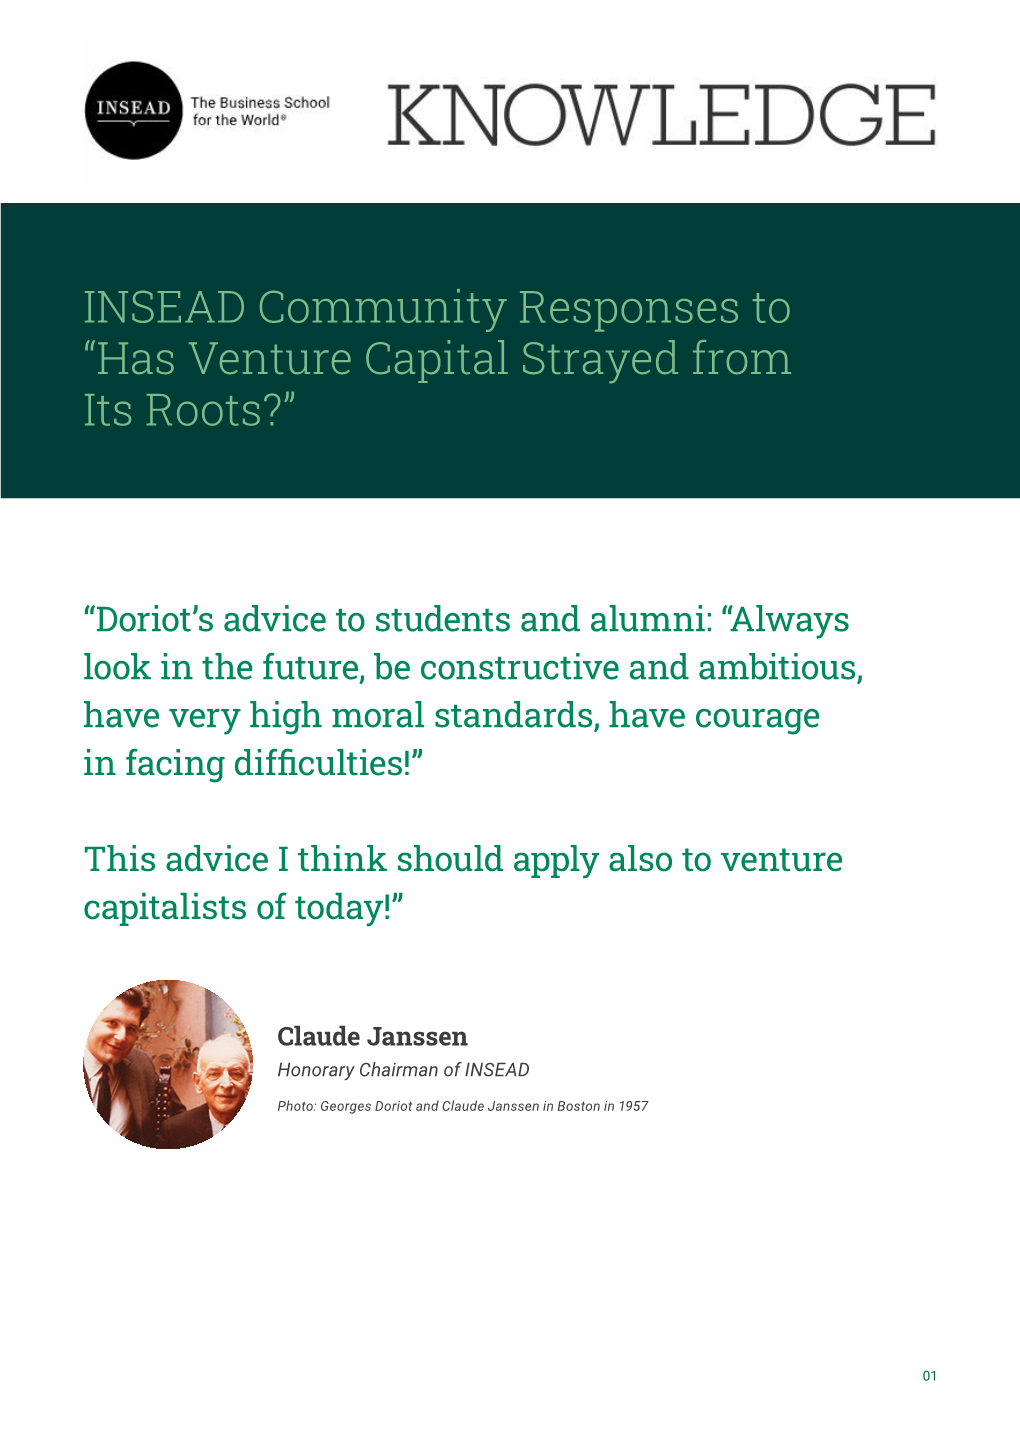 INSEAD Community Responses to “Has Venture Capital Strayed From